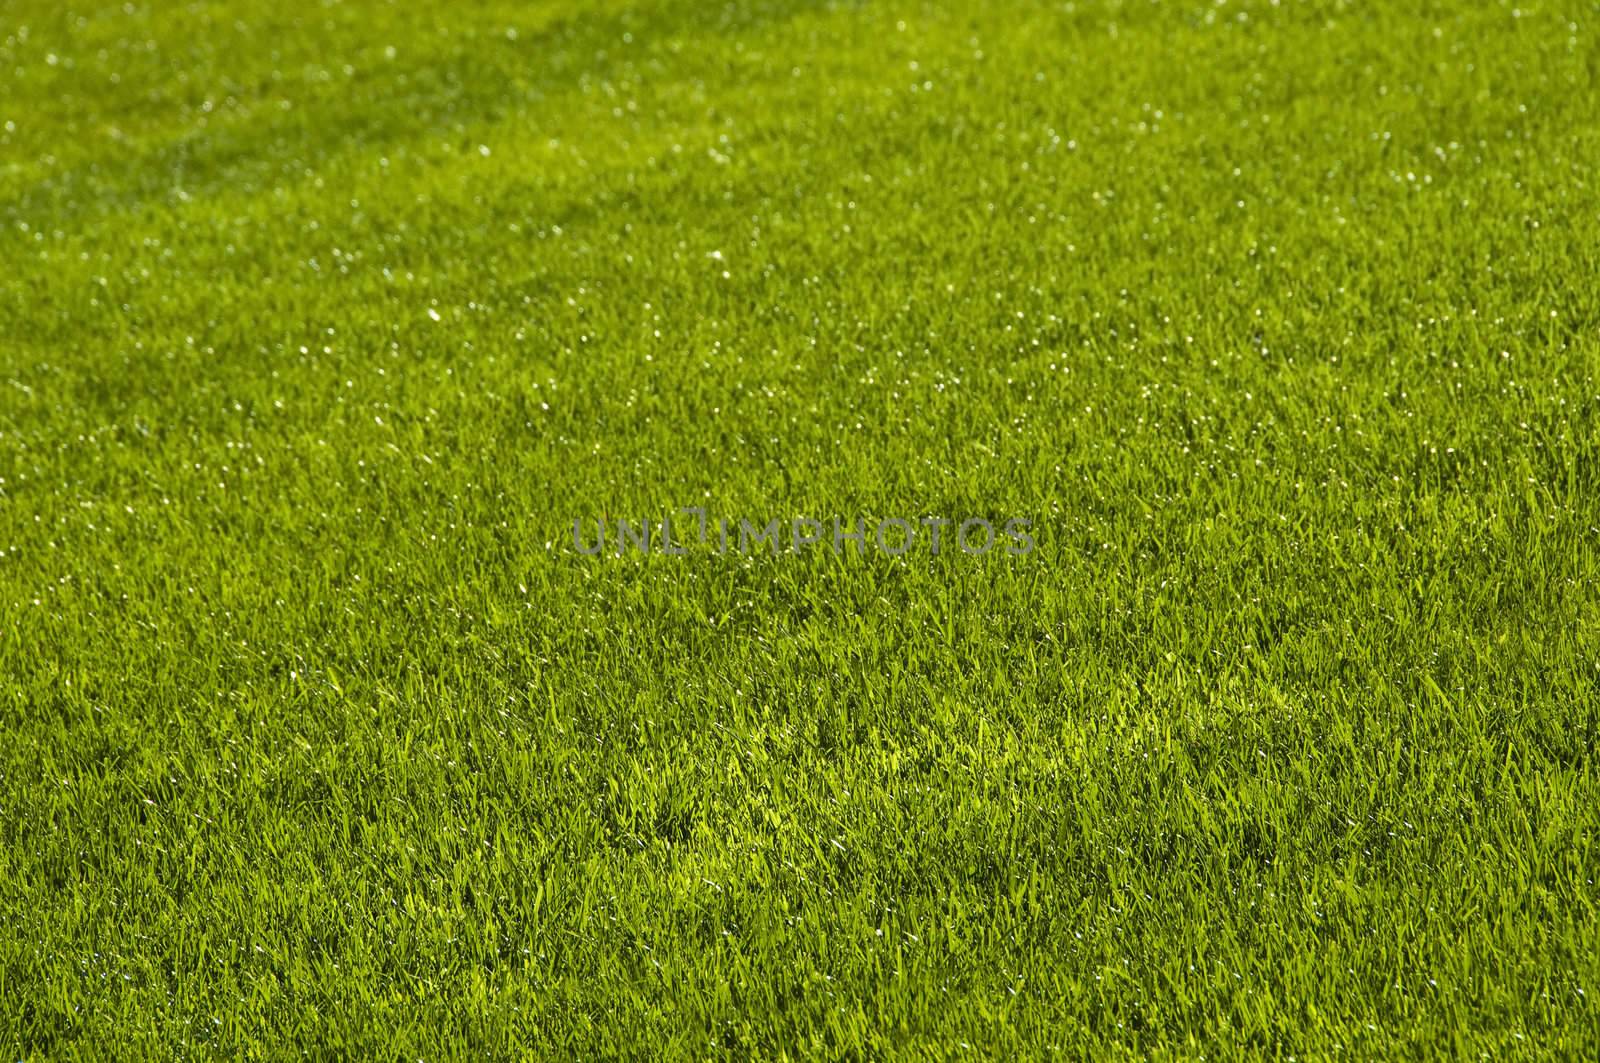 Perfectly mowed lawn in spring